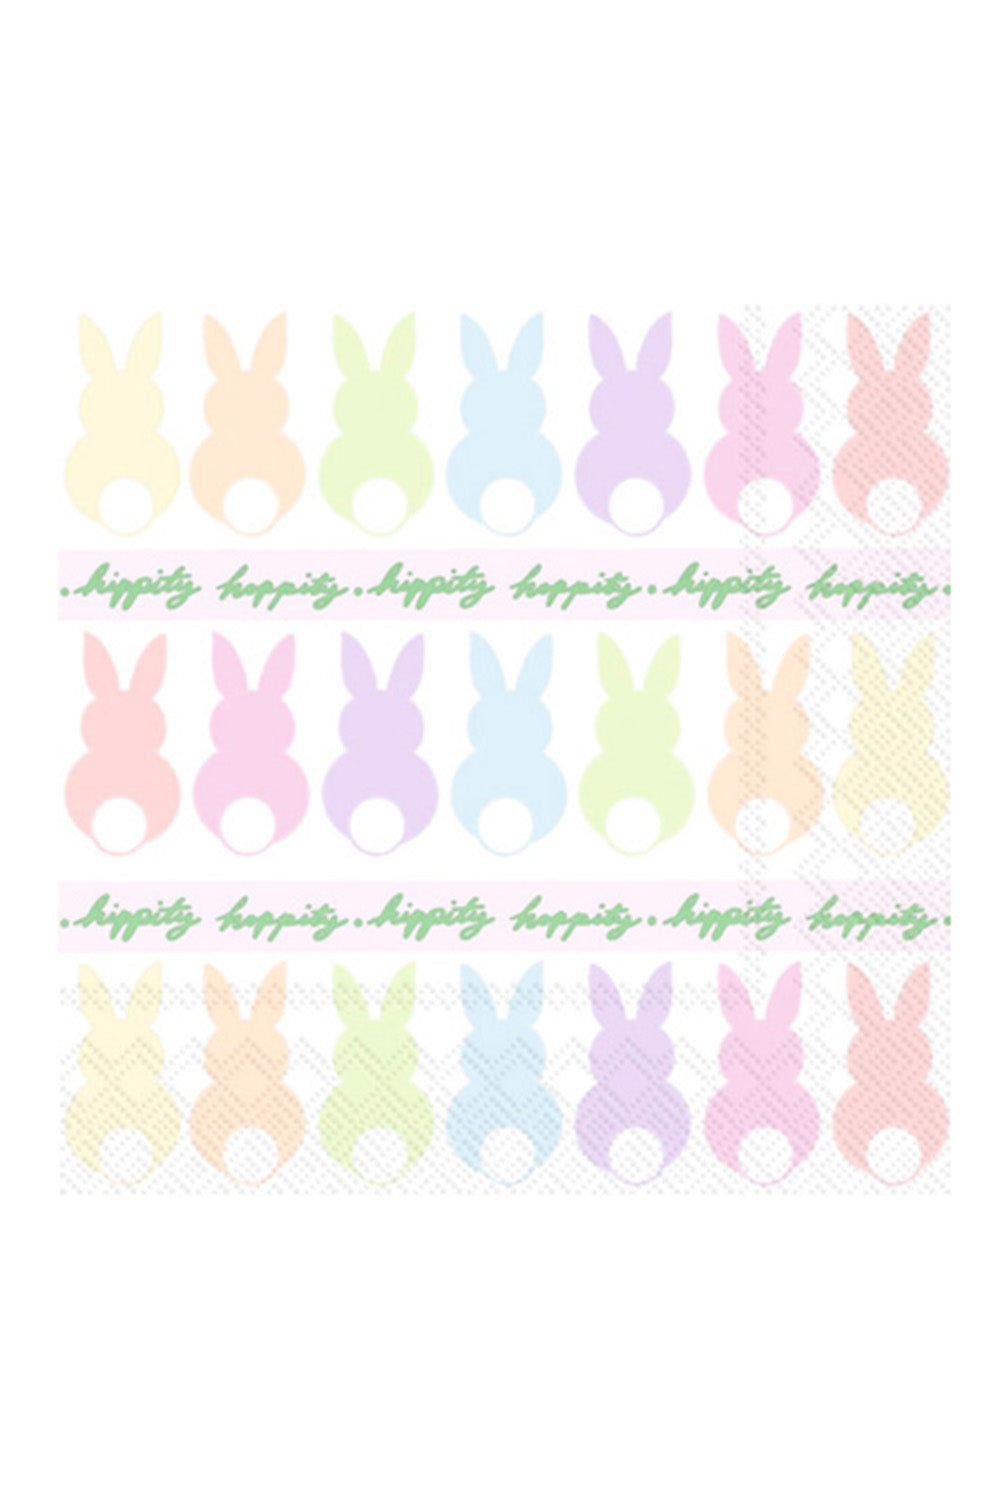 Cocktail Napkin Pack - Bunnies in a Row